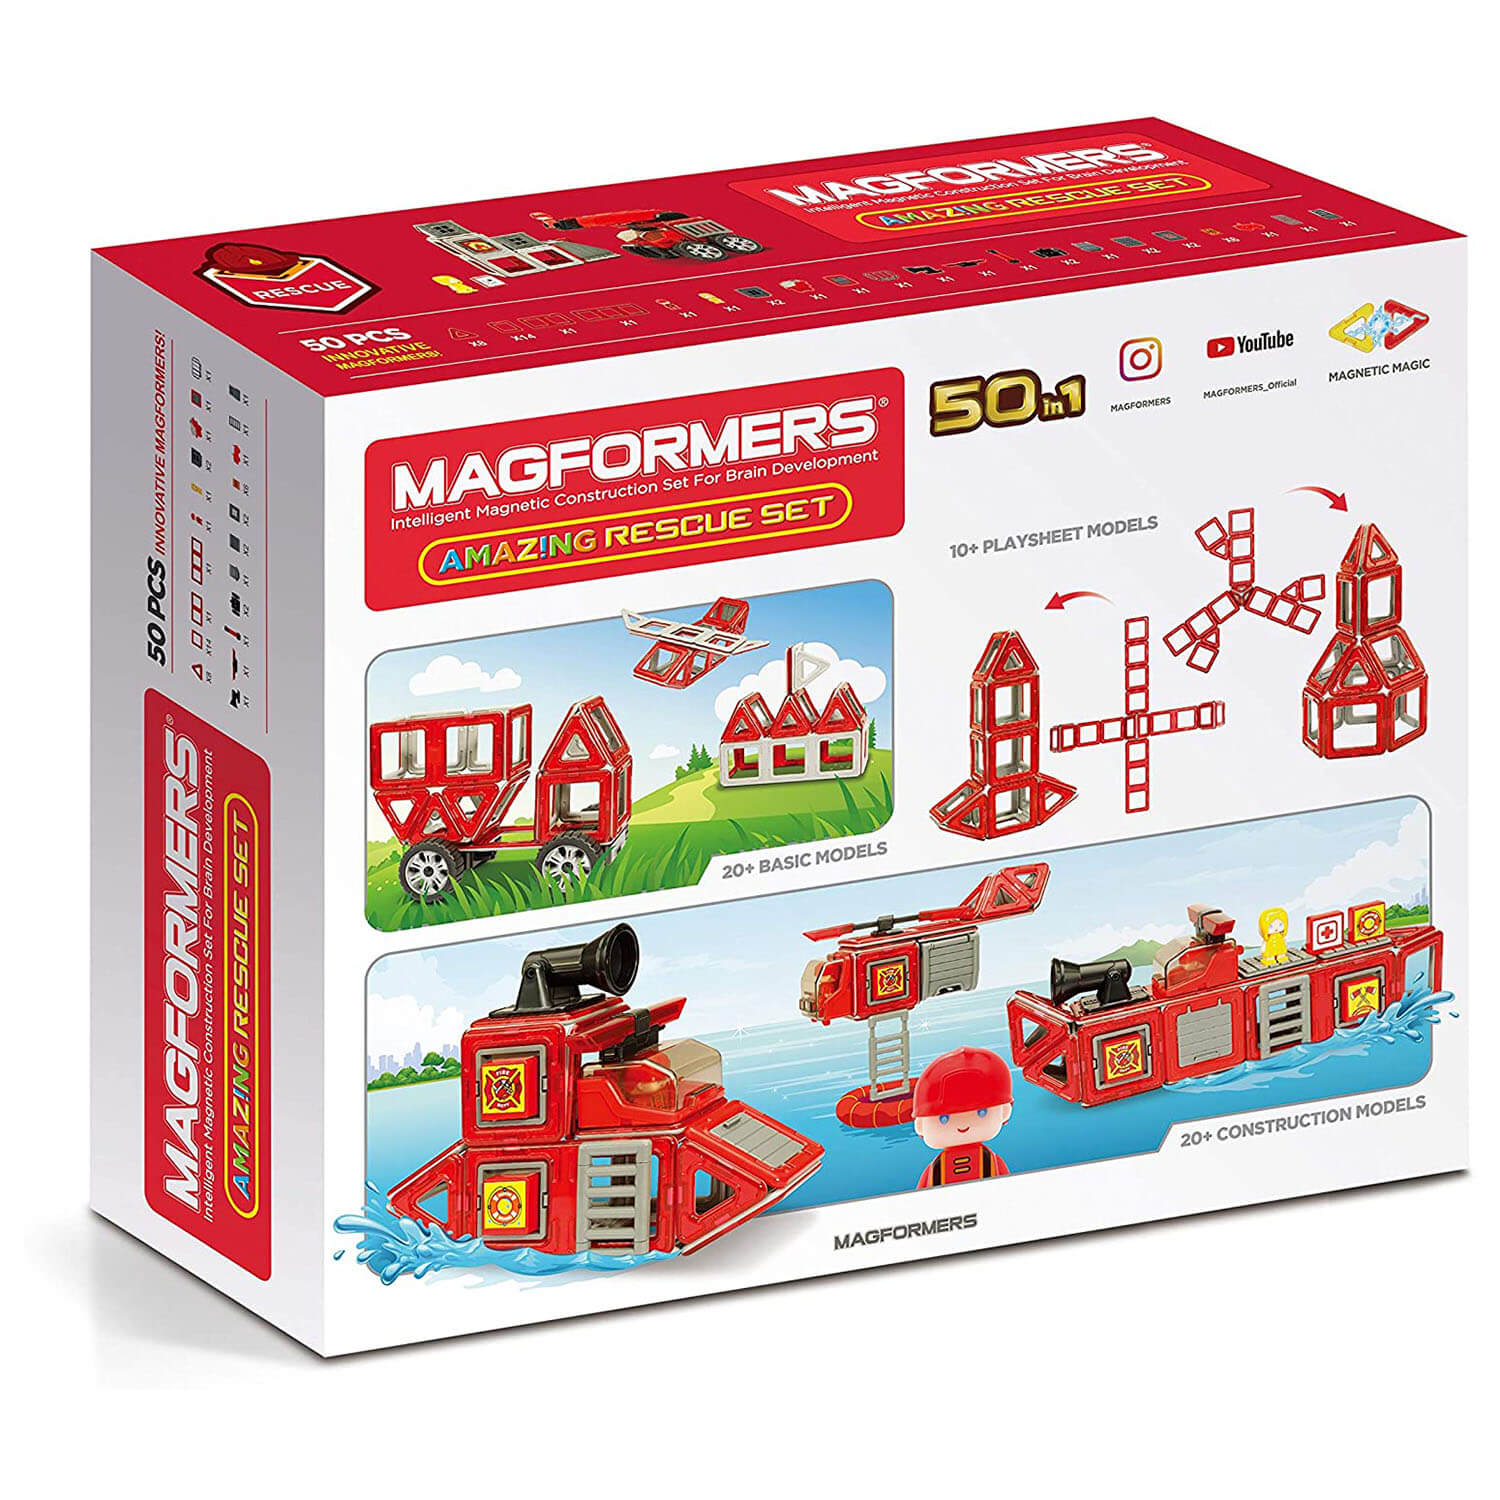 Front view of the Magformers Amazing Rescue 50 Piece Set package.